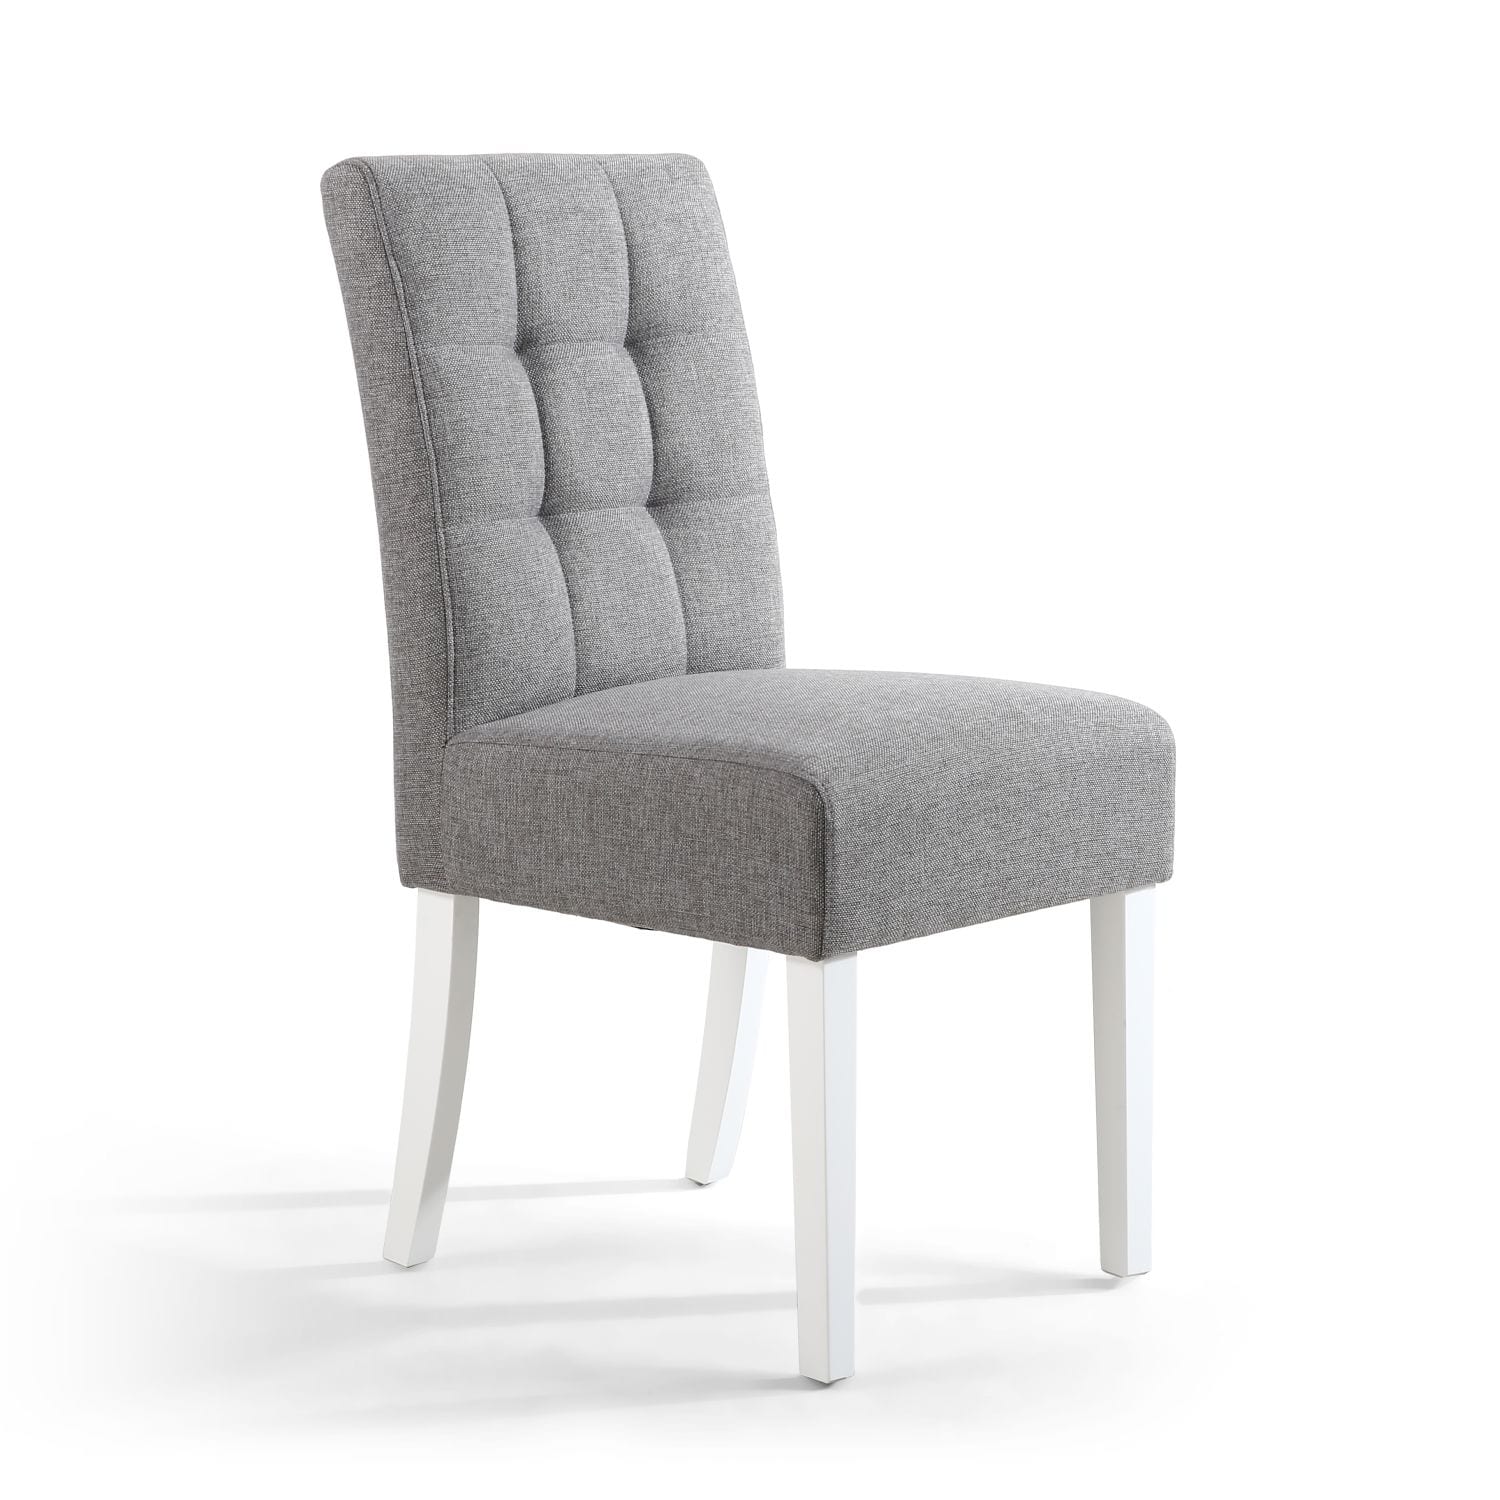 William Stitched Waffle Linen Effect Silver Grey Chair White Legs.